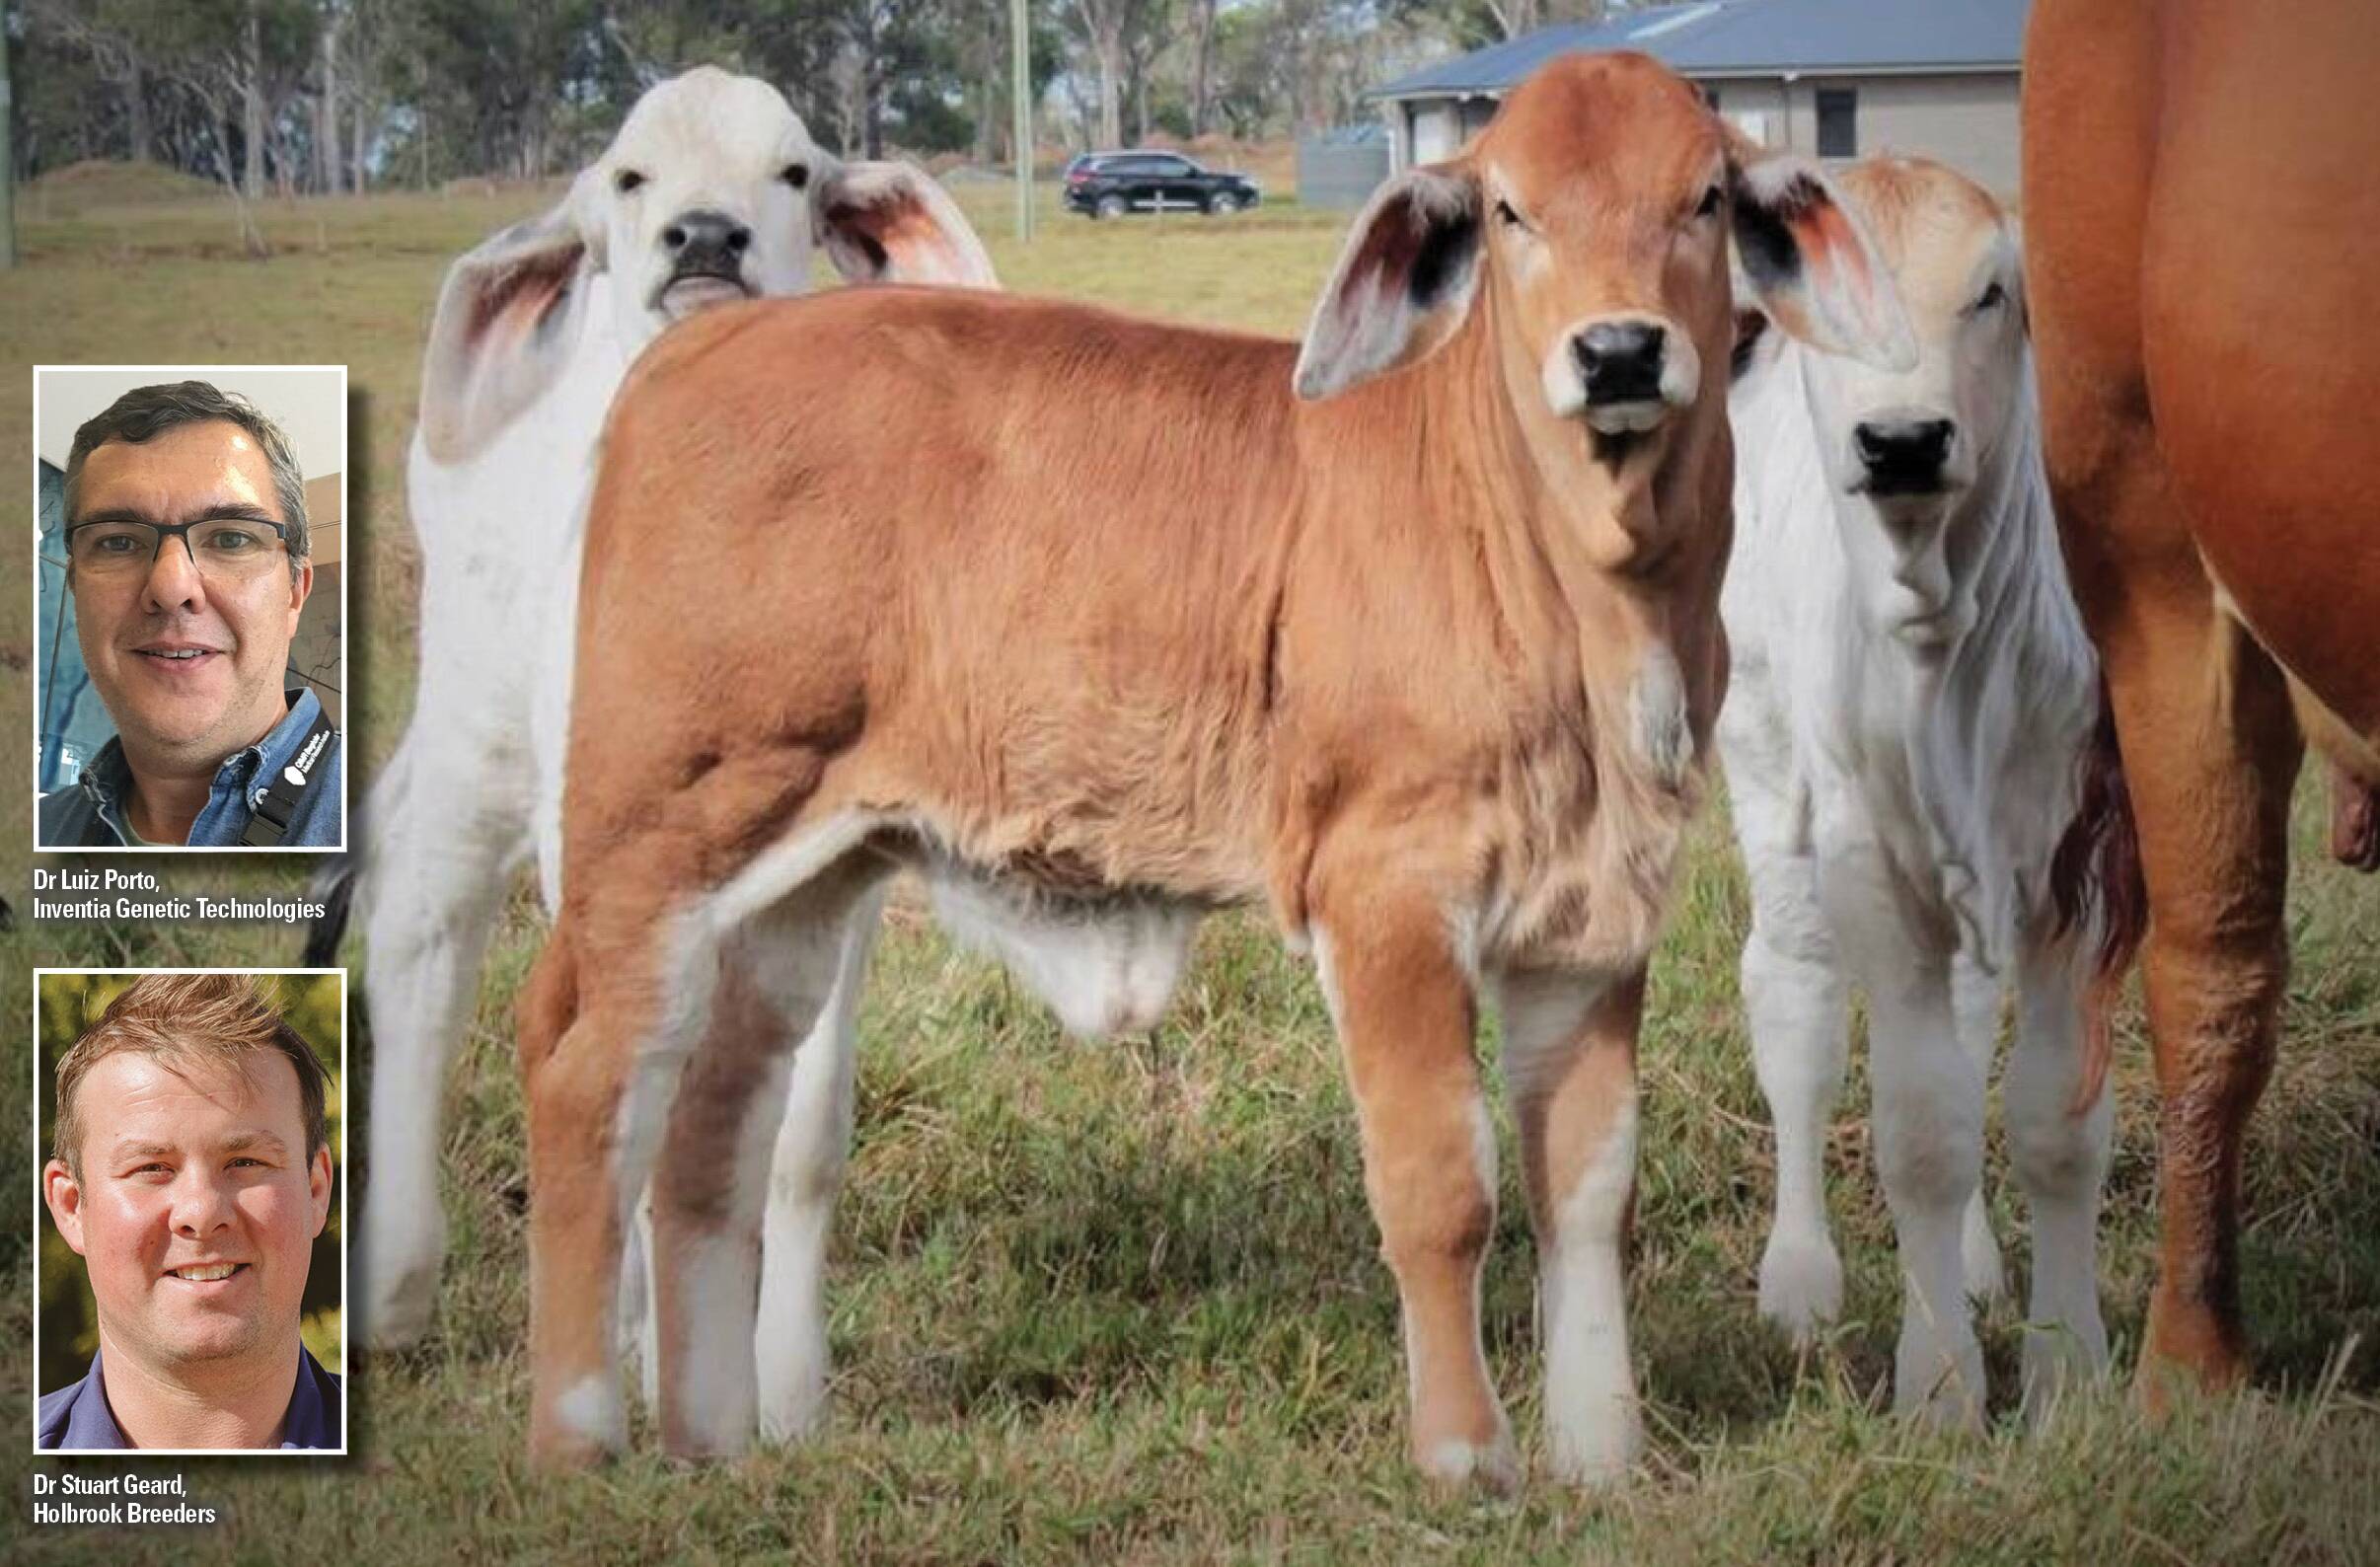 IVF or conventional flushing in cattle, what's best? | The Land | NSW